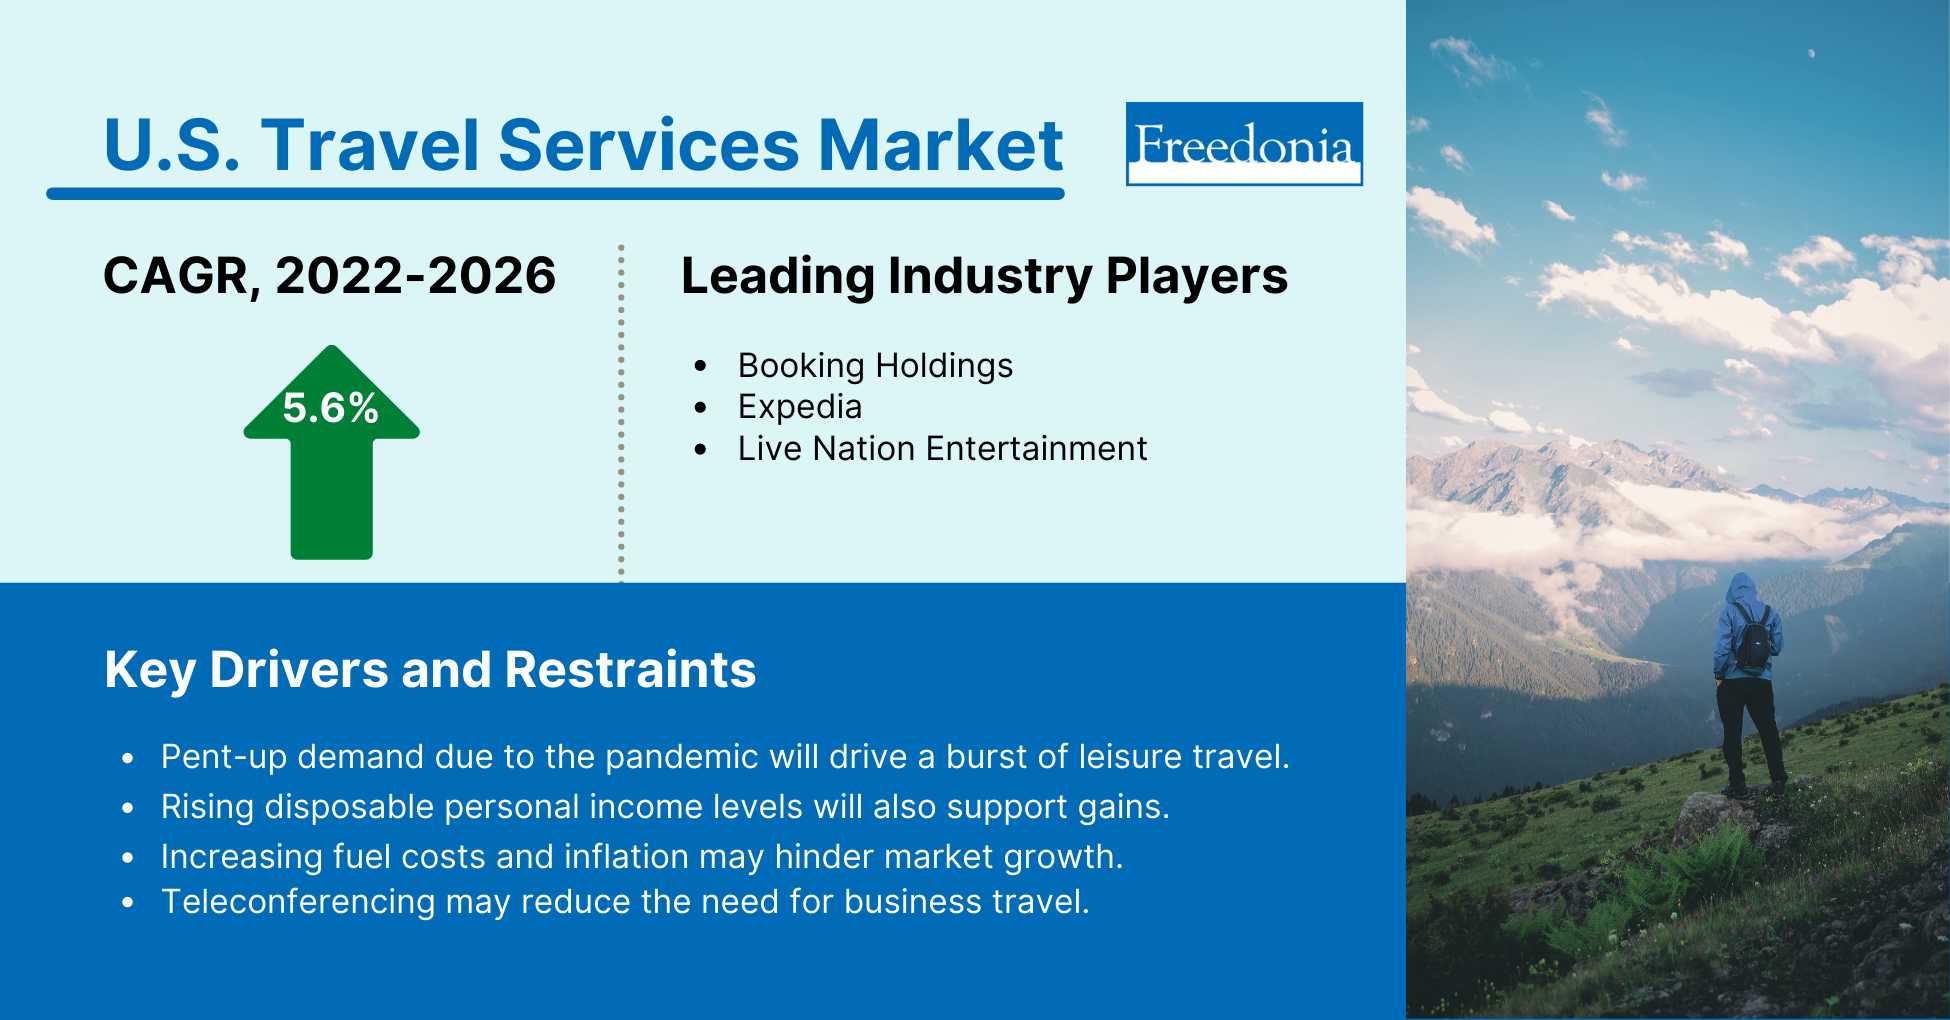 U.S. Travel Market Research 2022-2026 Infographic